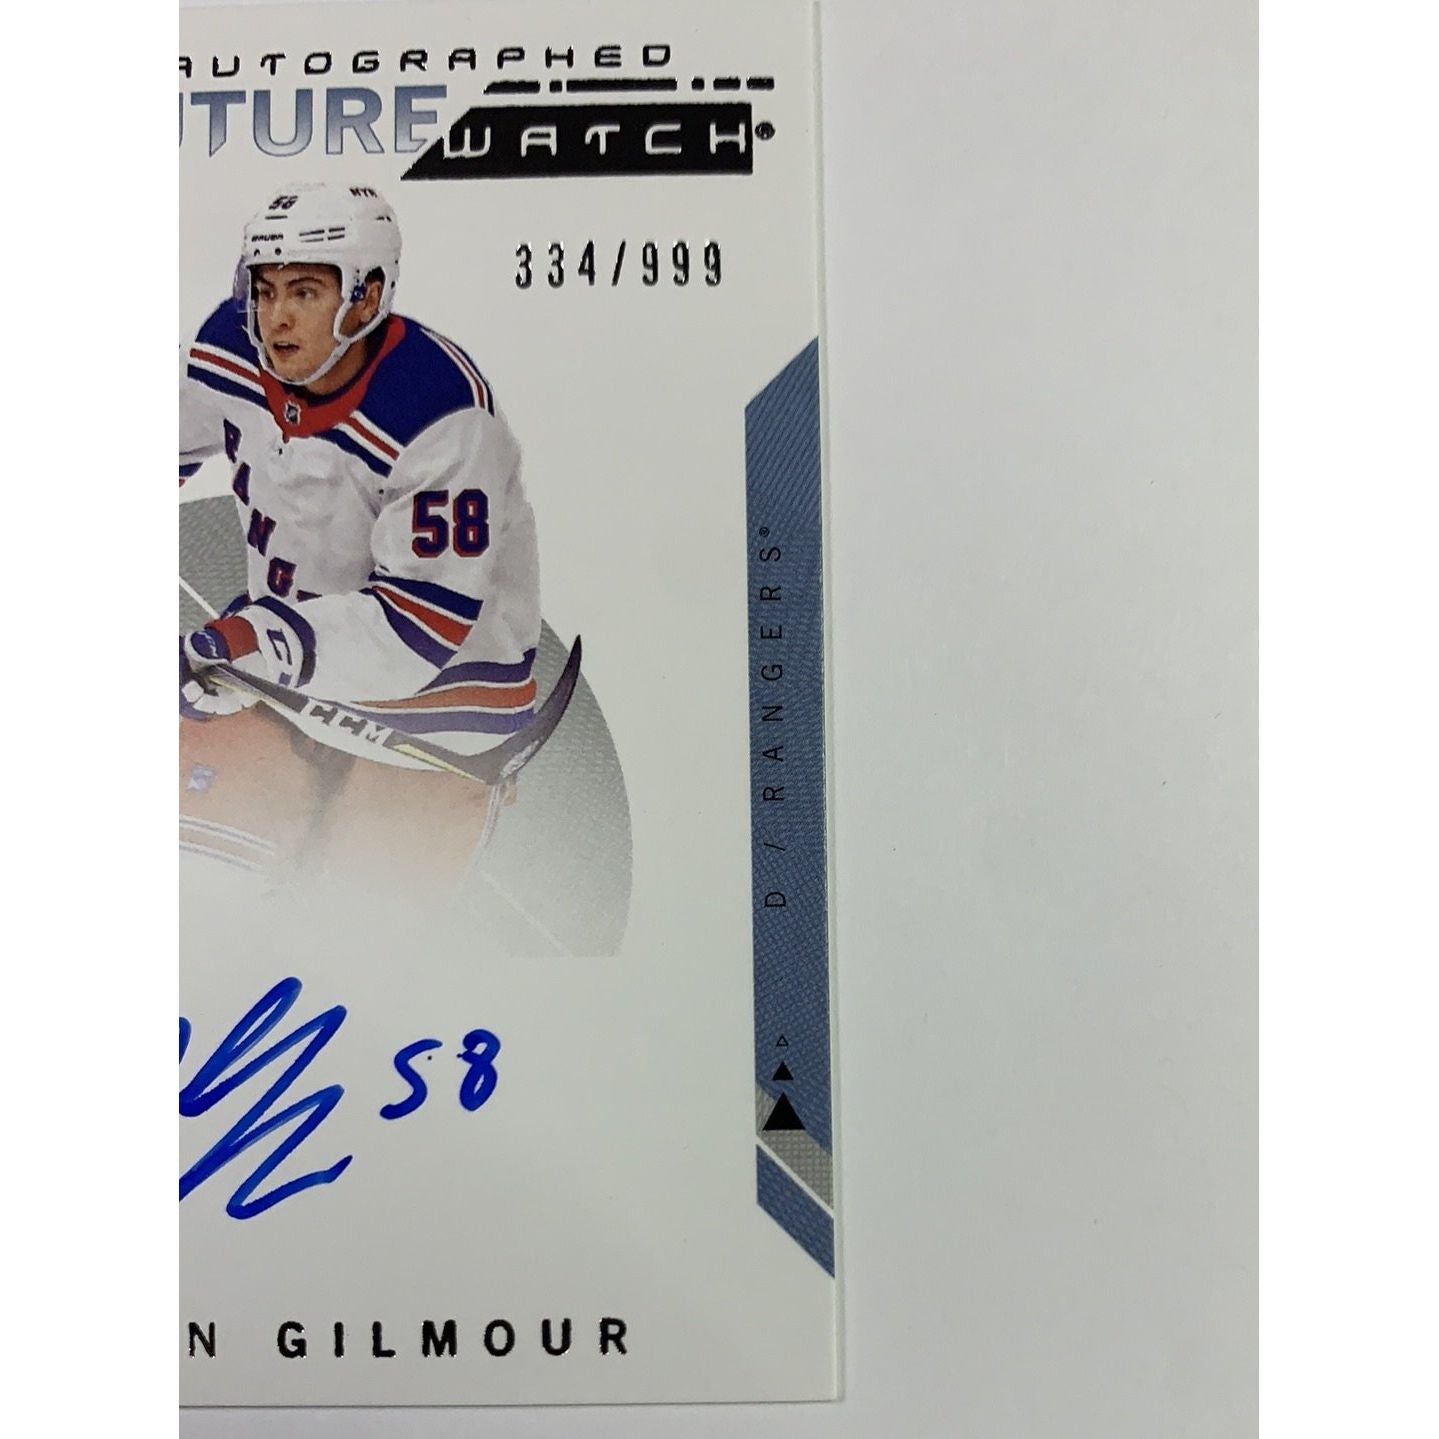  2018-19 SP John Gilmour Future Watch Auto /999  Local Legends Cards & Collectibles